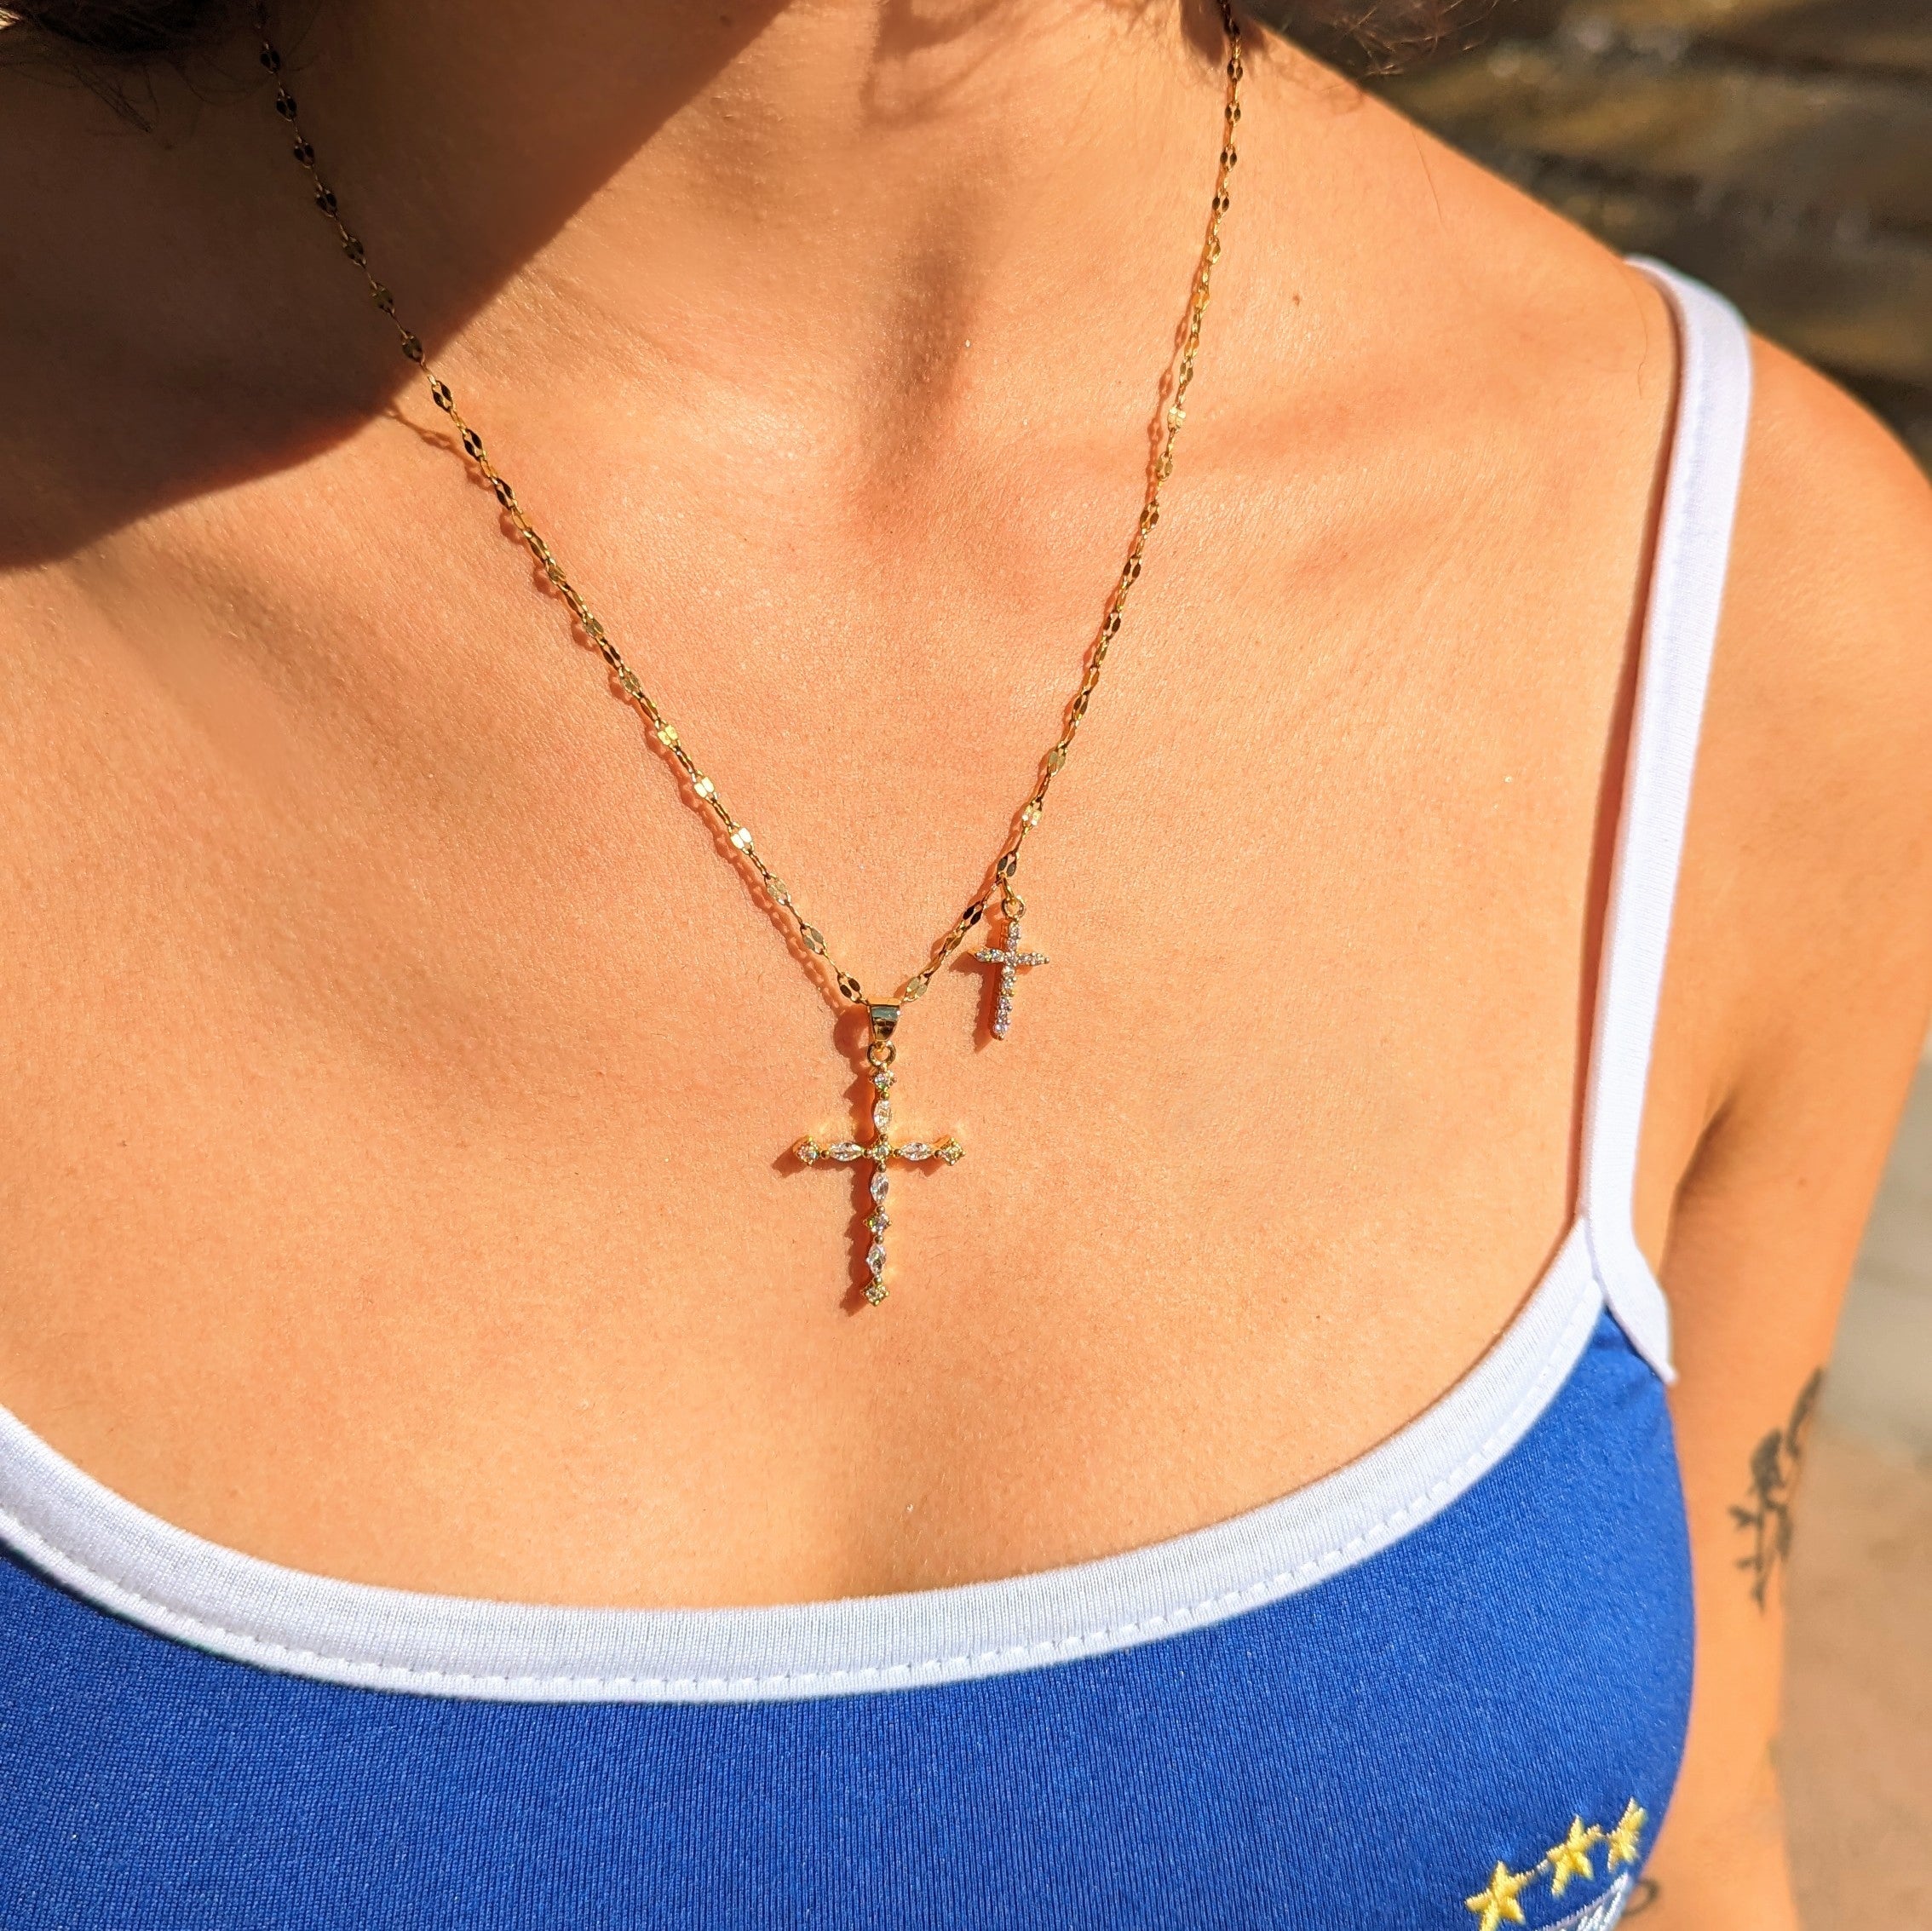 Wholesale Crystal Cross | Jewelry Crosses Crystal | Cross Necklace Crystal  - New Fashion - Aliexpress